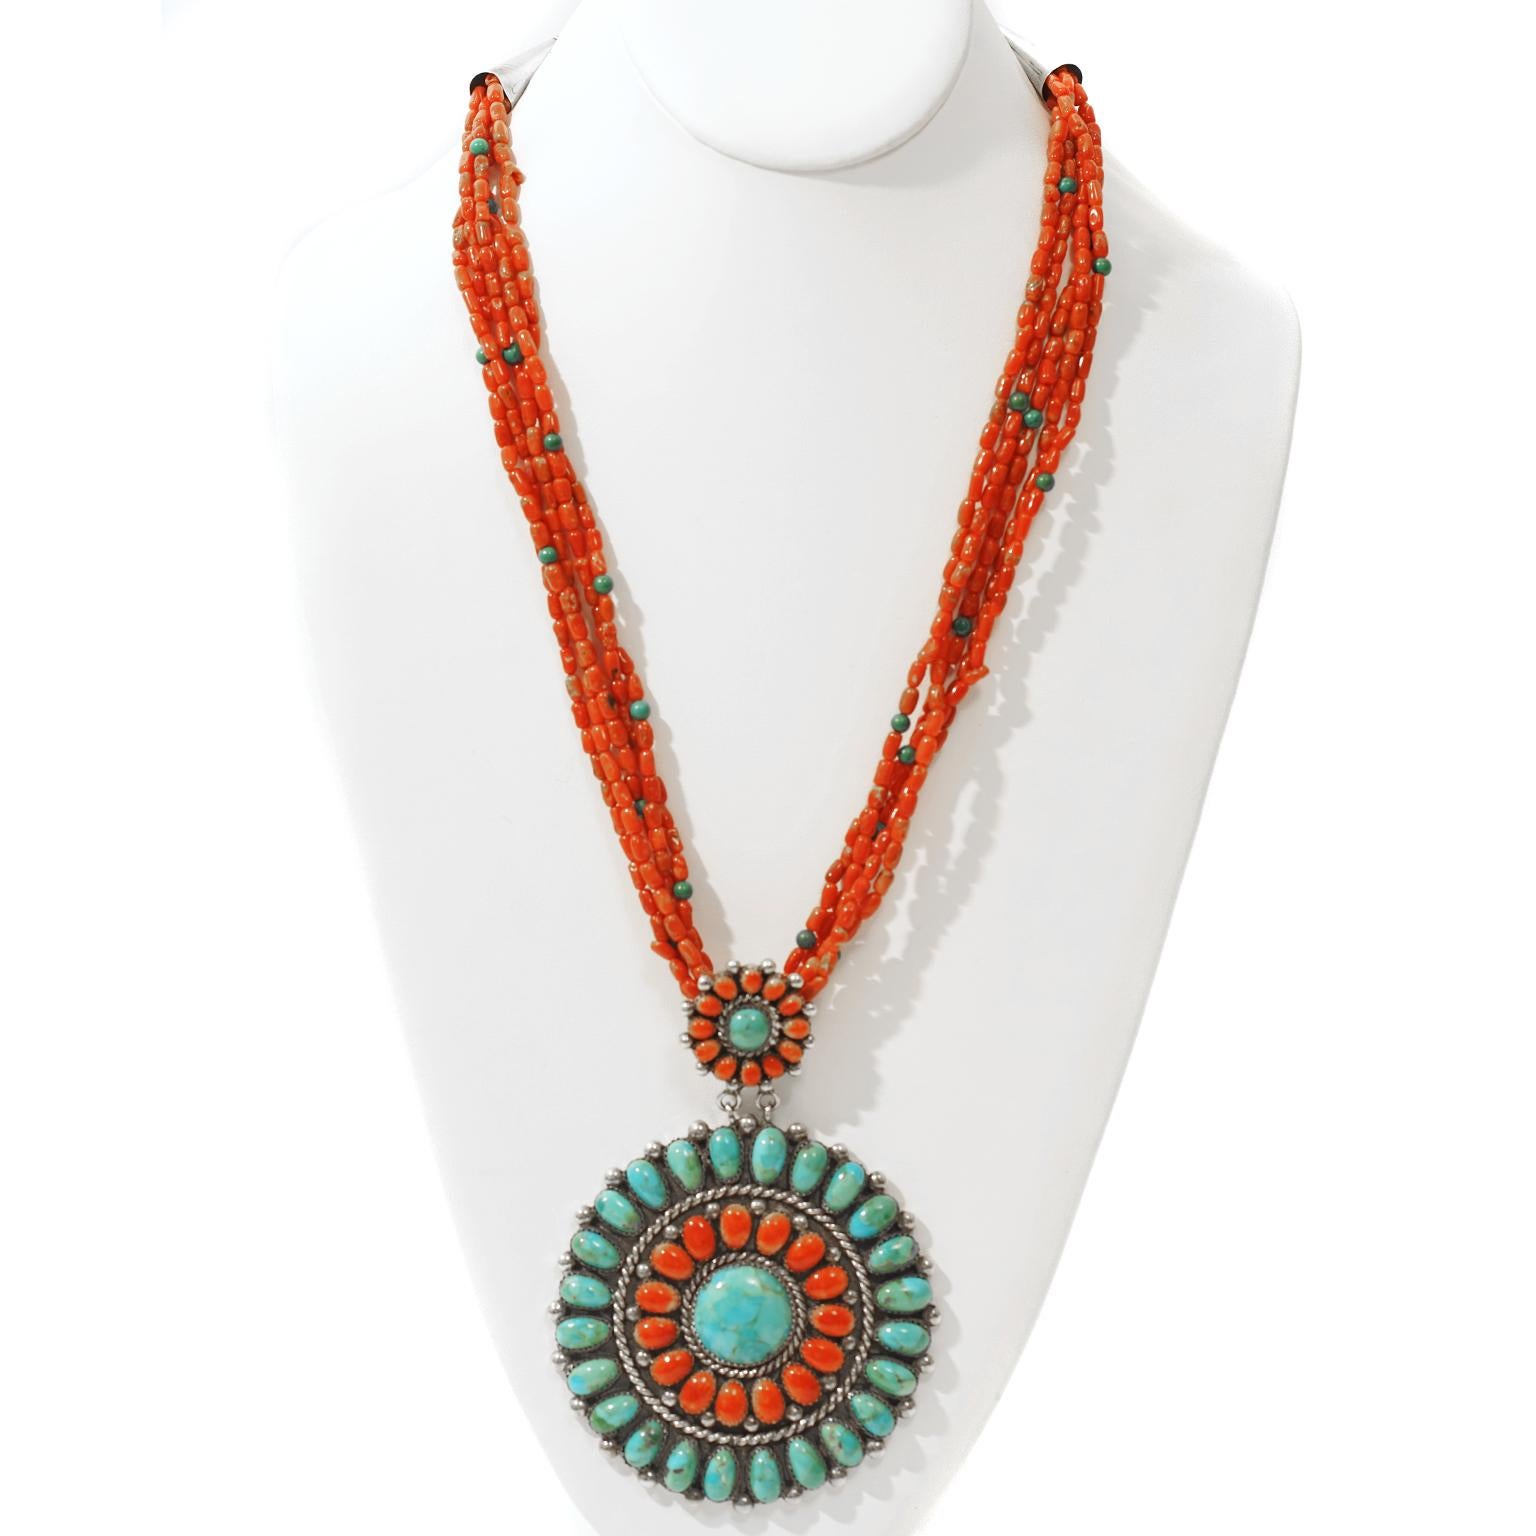 Coral and Turquoise Necklace with Fabulous Medallion 3